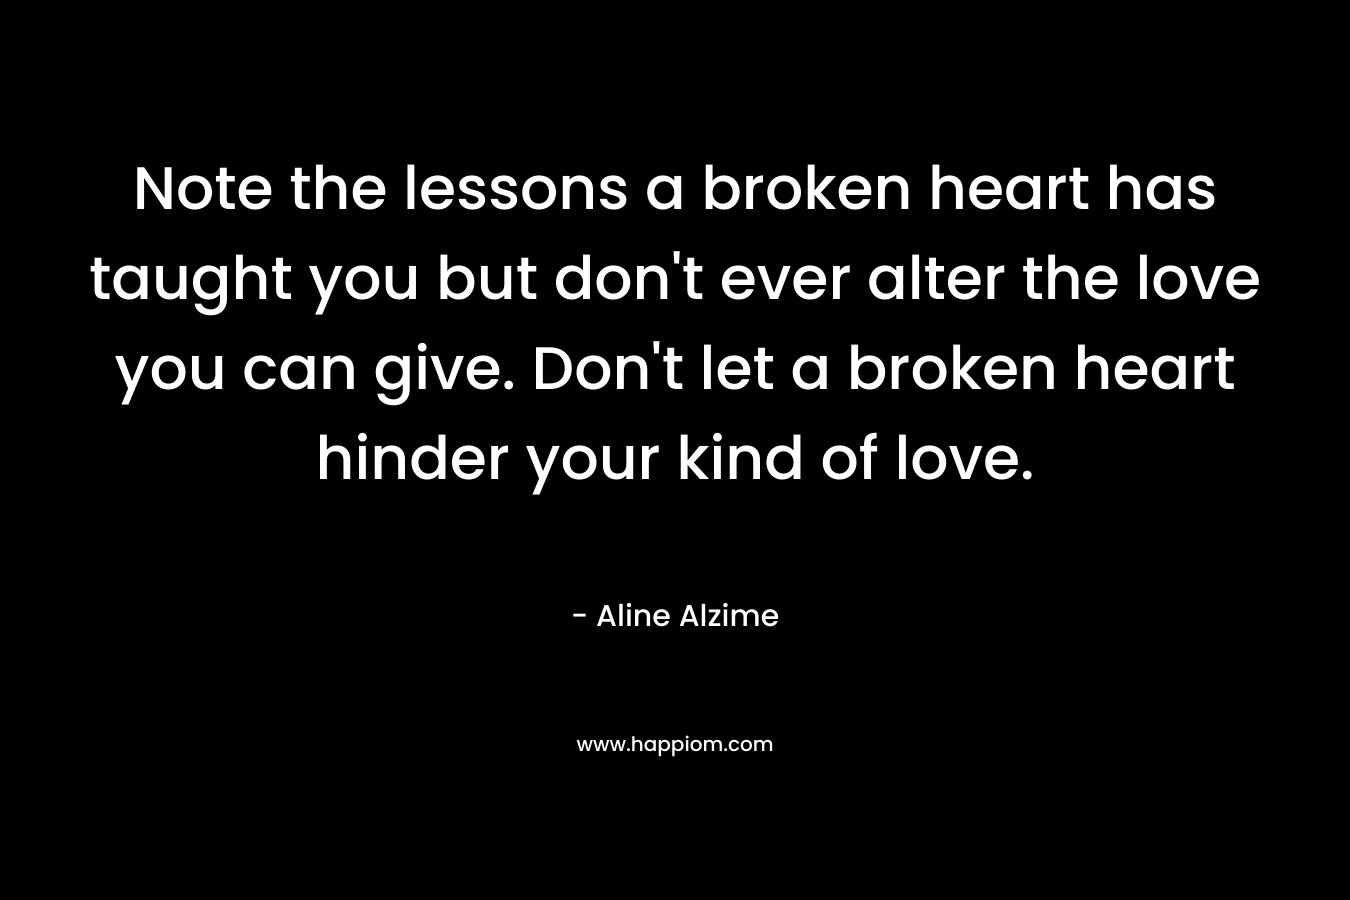 Note the lessons a broken heart has taught you but don't ever alter the love you can give. Don't let a broken heart hinder your kind of love.